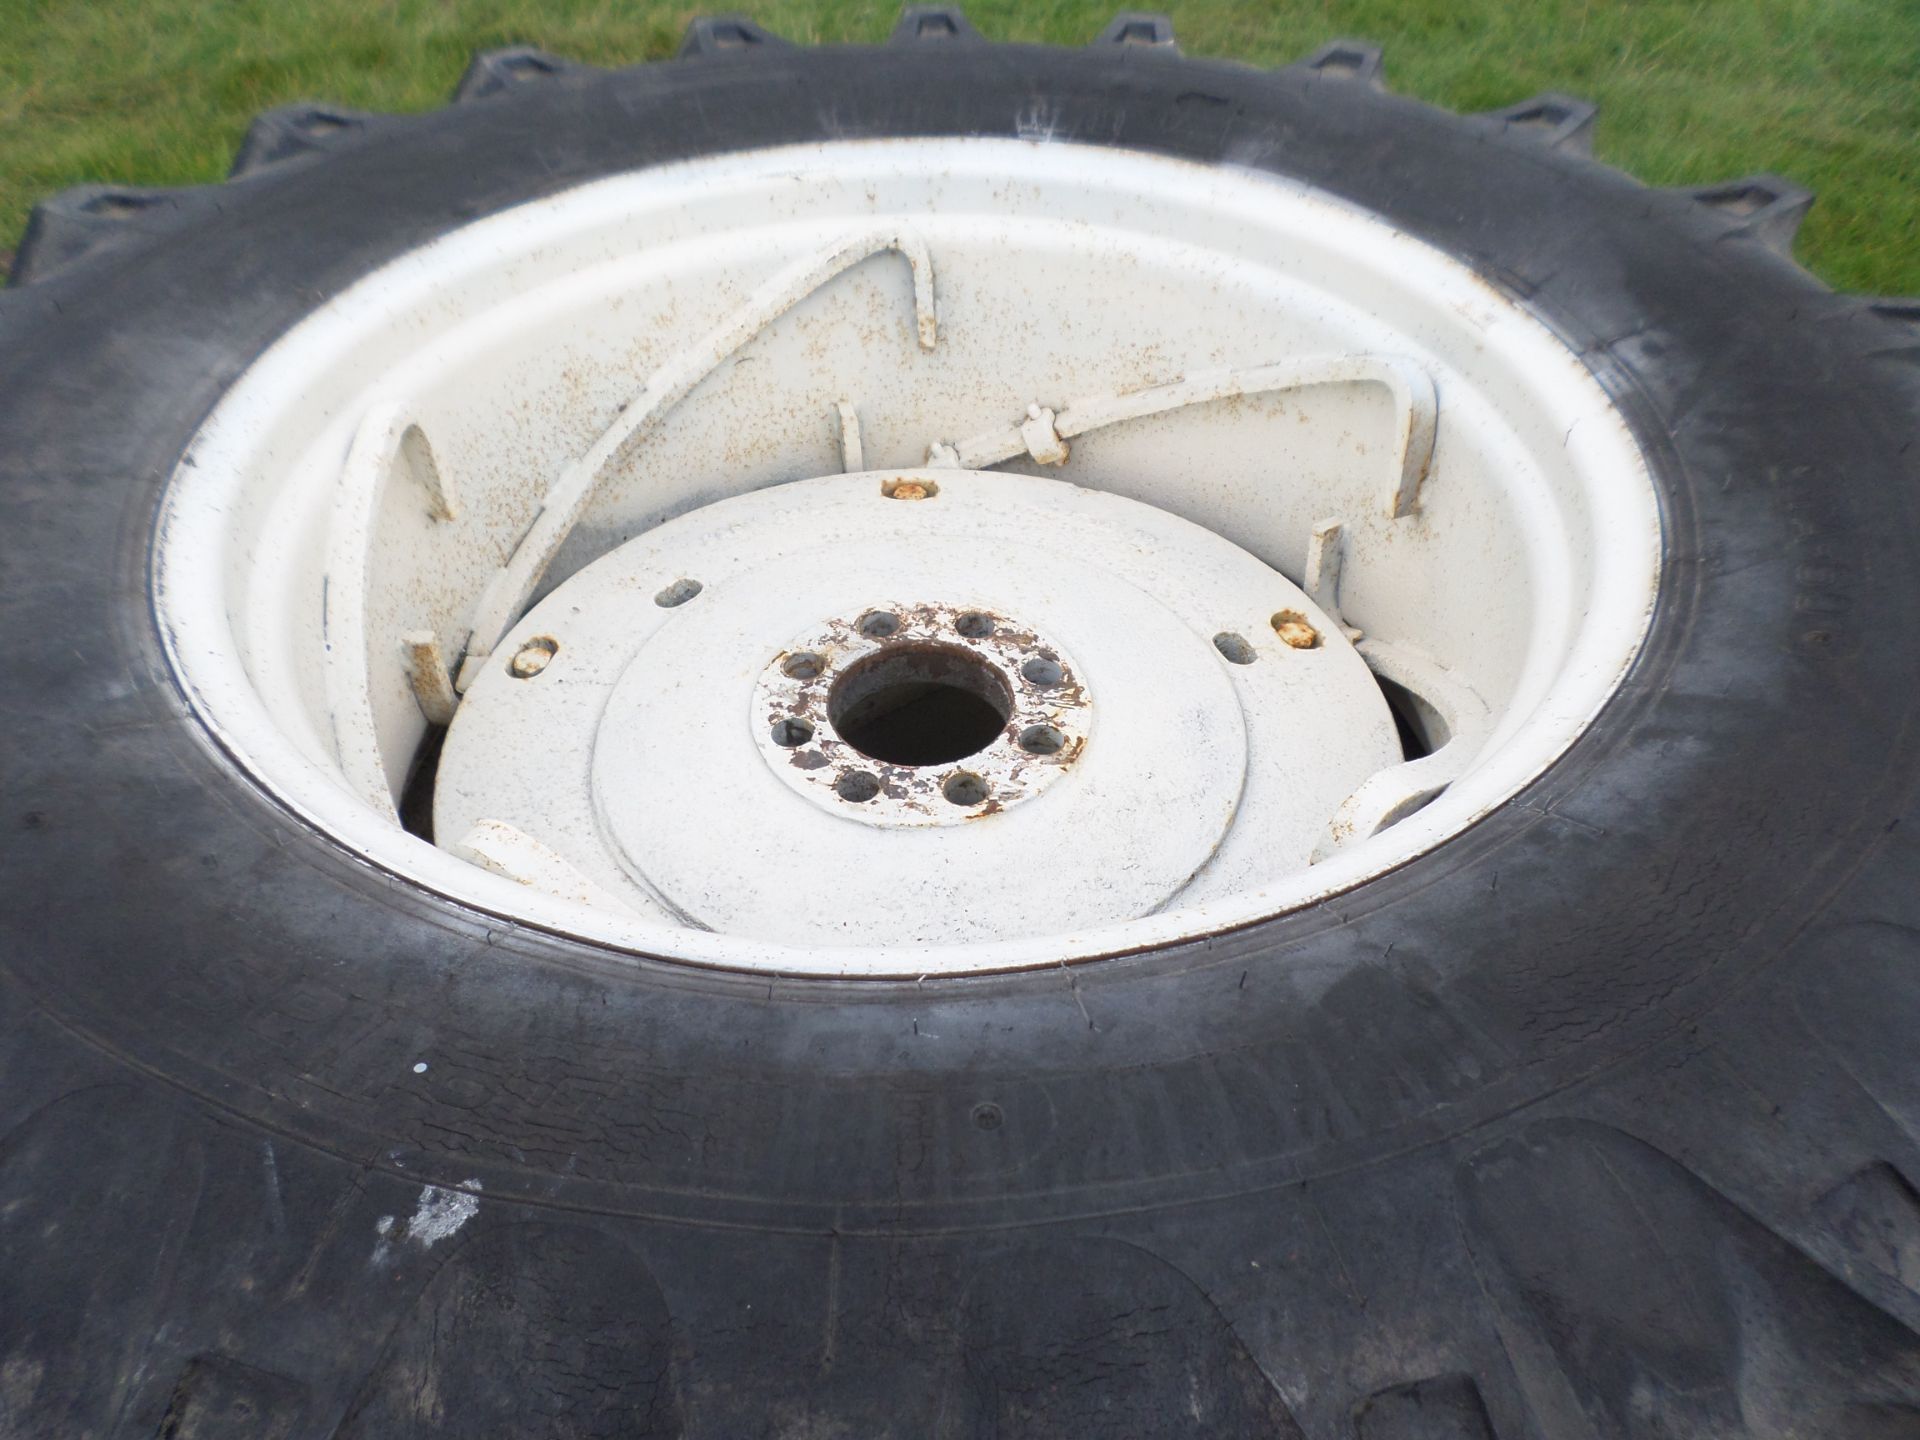 Pair of MF PAVT wheels/tyres 18.4/34, 95\% tread, excellent condition - Image 2 of 2